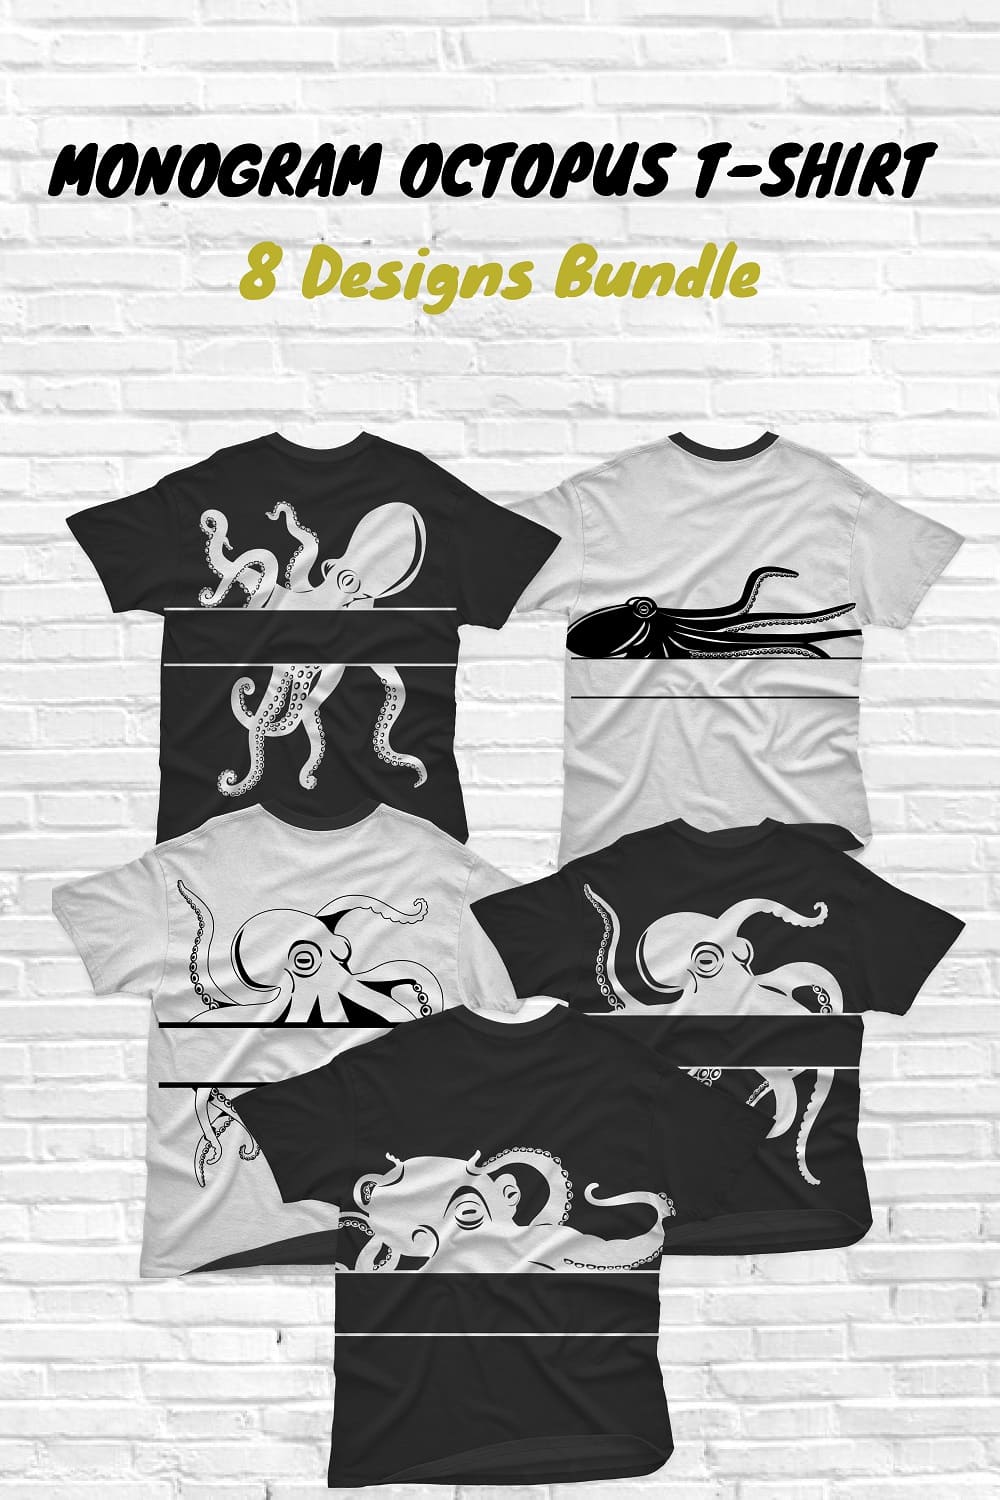 Five designs of white and black Monogram Octopus T-shirts.